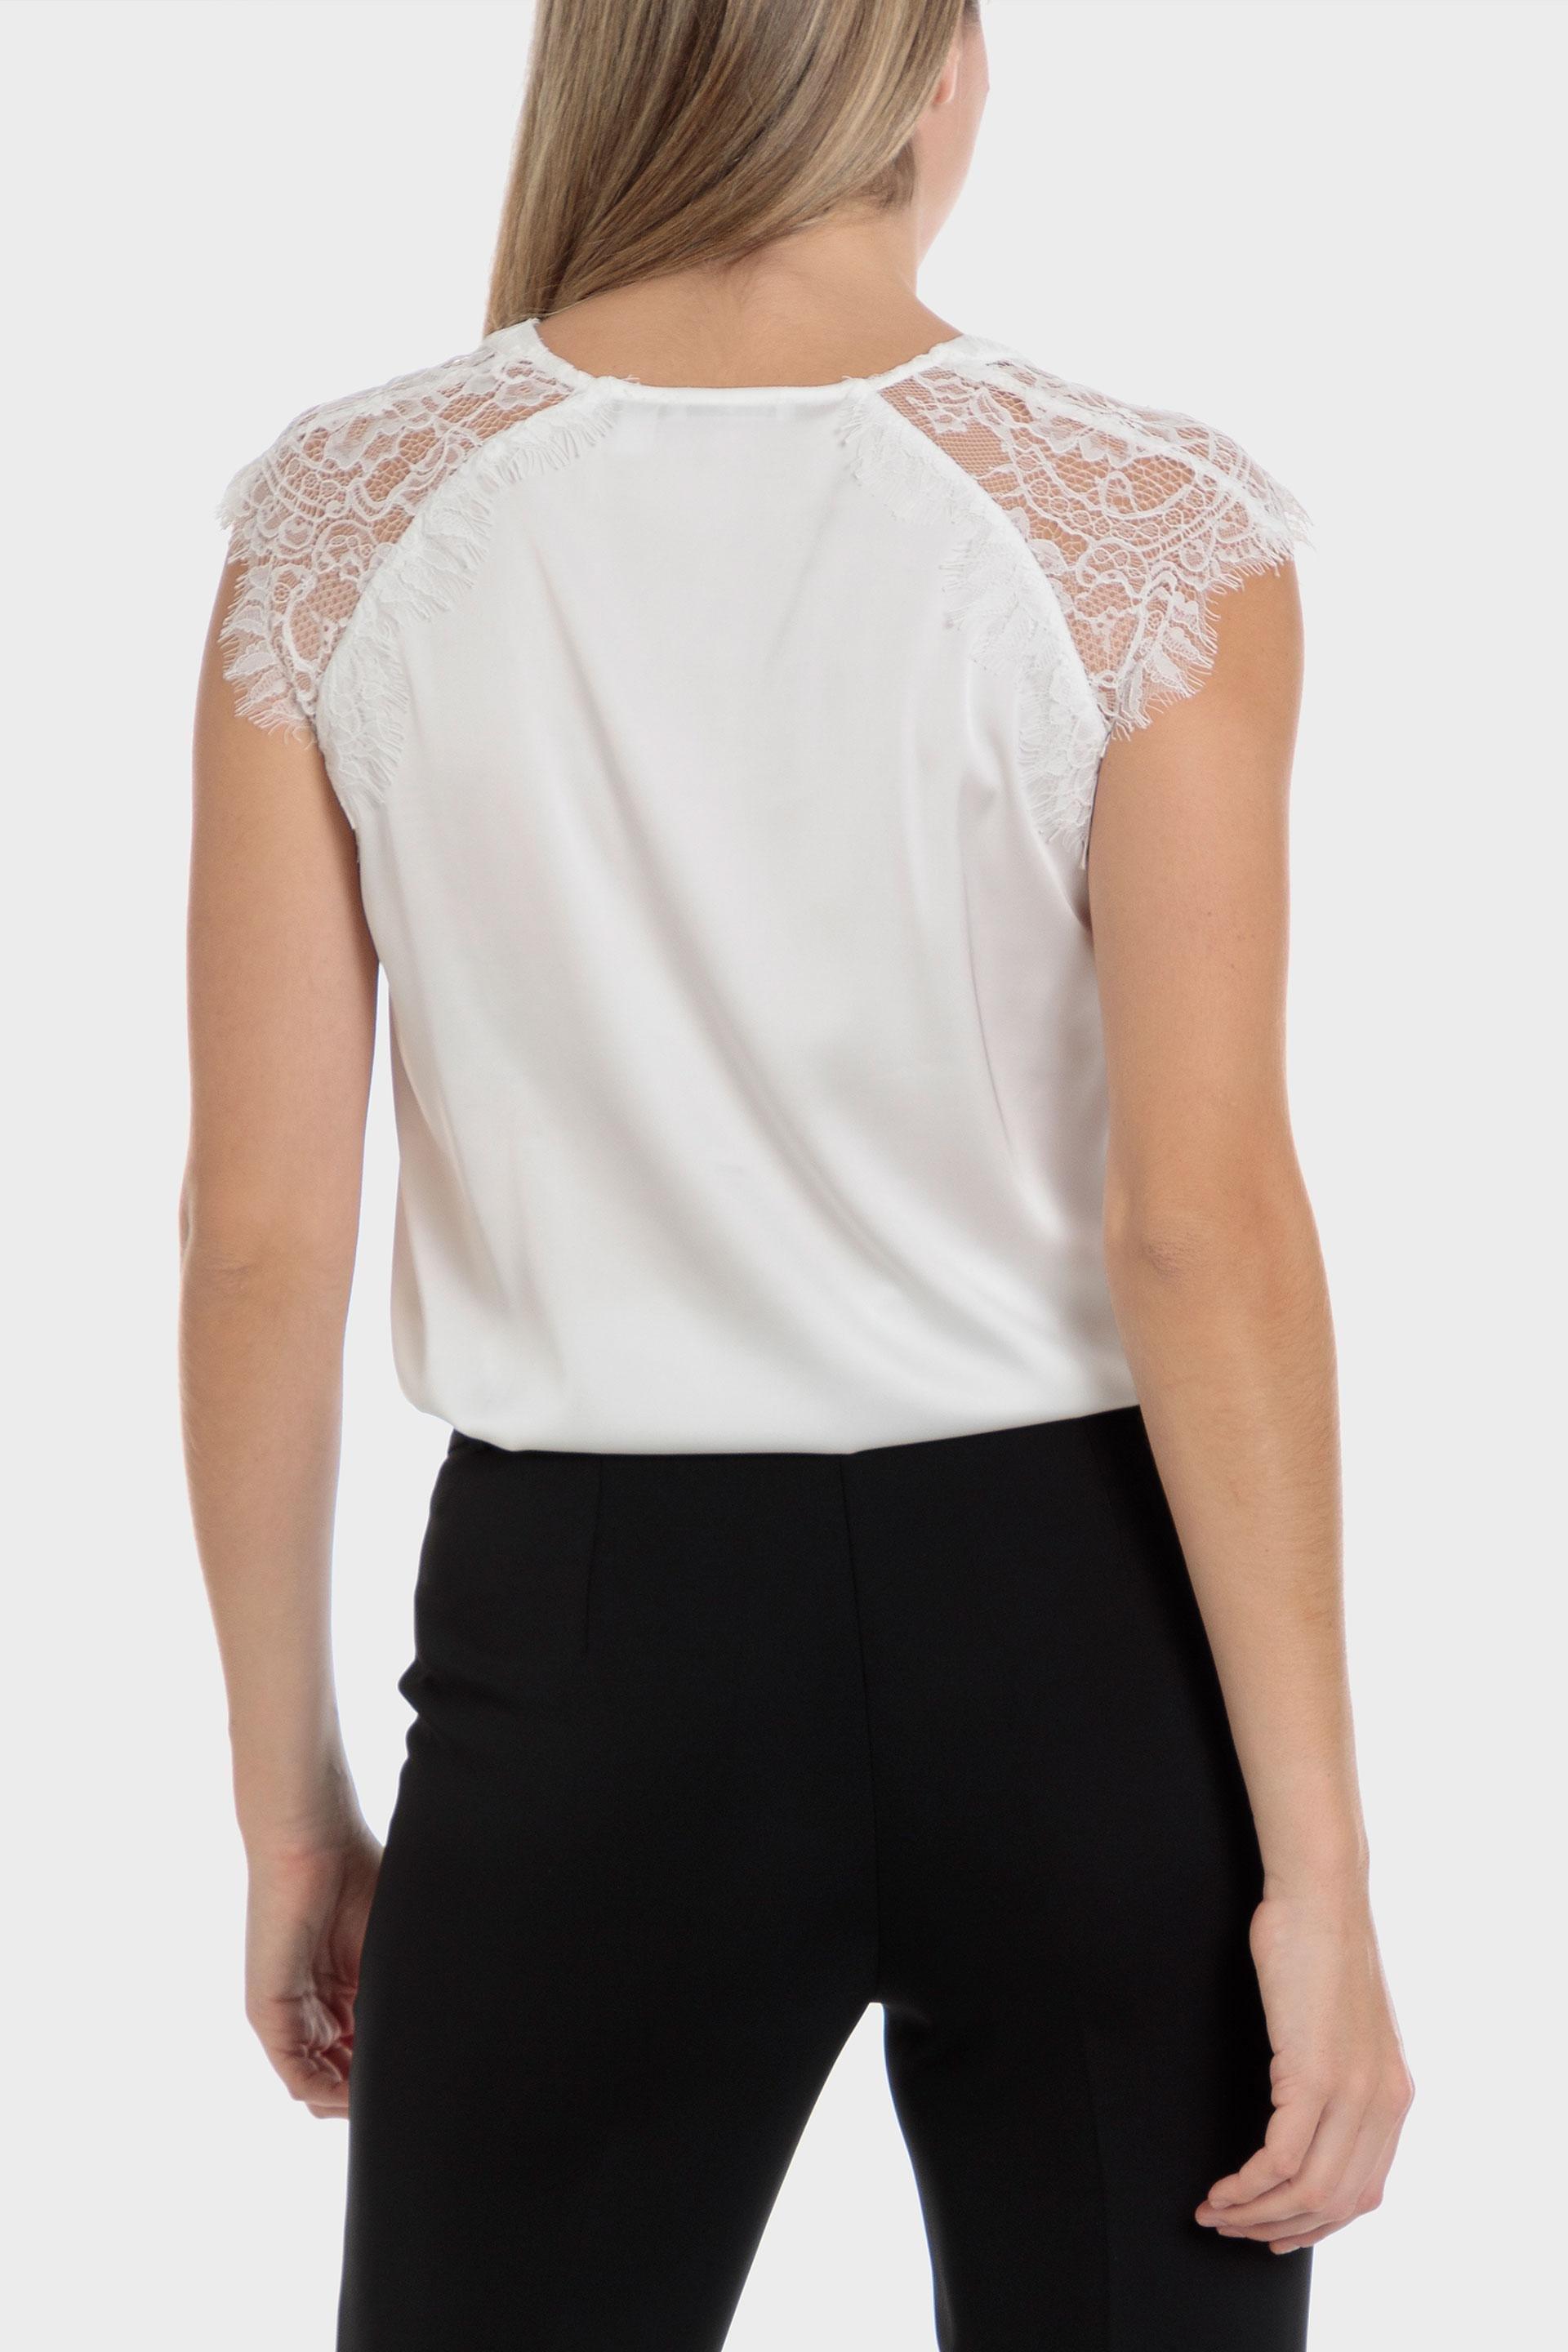 Punt Roma - White Lace Top